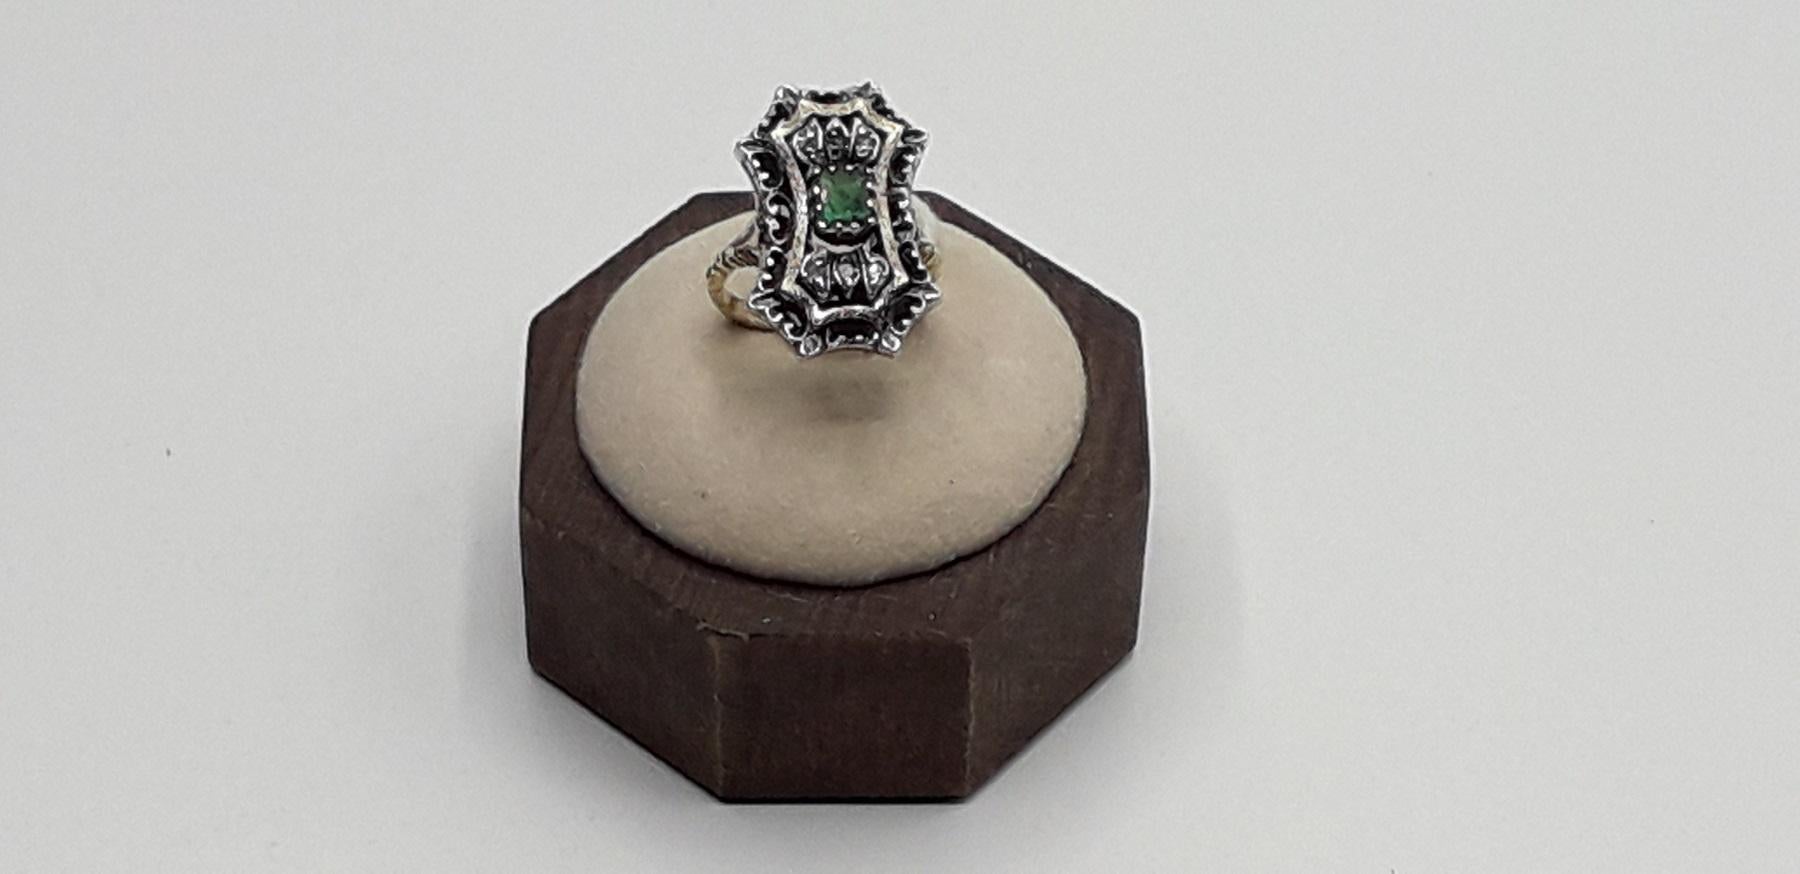 Silver and Gold ring with central emerald surrounded by small diamonds. Ring size Italian 11 please see the conversion in the table in the picture. This beautiful ring of Italian luxury jewelry 1980s is perfect for a refined and elegant woman. 
